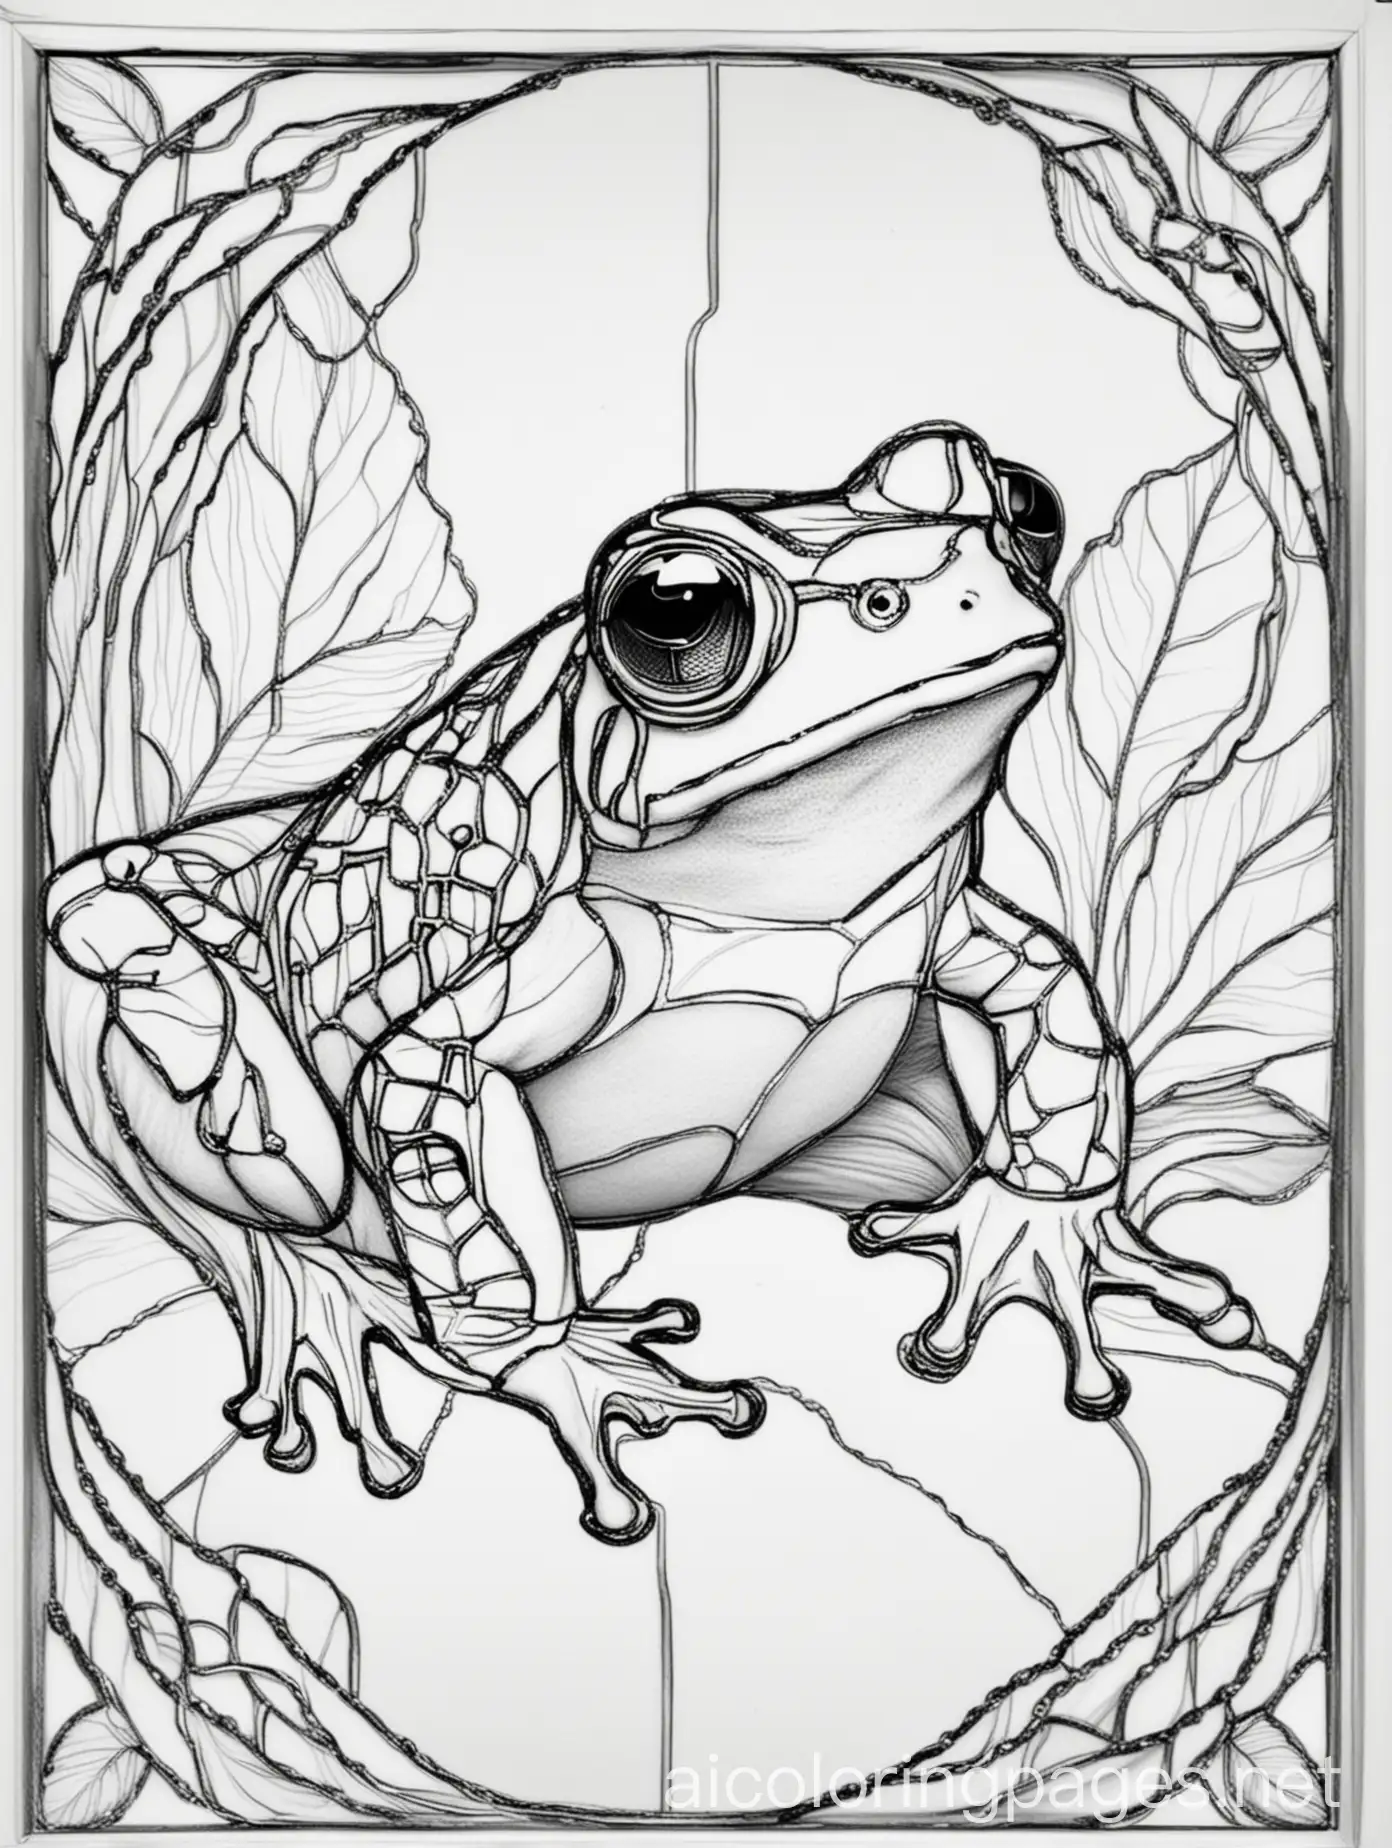 stain glass frog, adult, Coloring Page, black and white, line art, white background, Simplicity, Ample White Space. The background of the coloring page is plain white to make it easy for young children to color within the lines. The outlines of all the subjects are easy to distinguish, making it simple for kids to color without too much difficulty